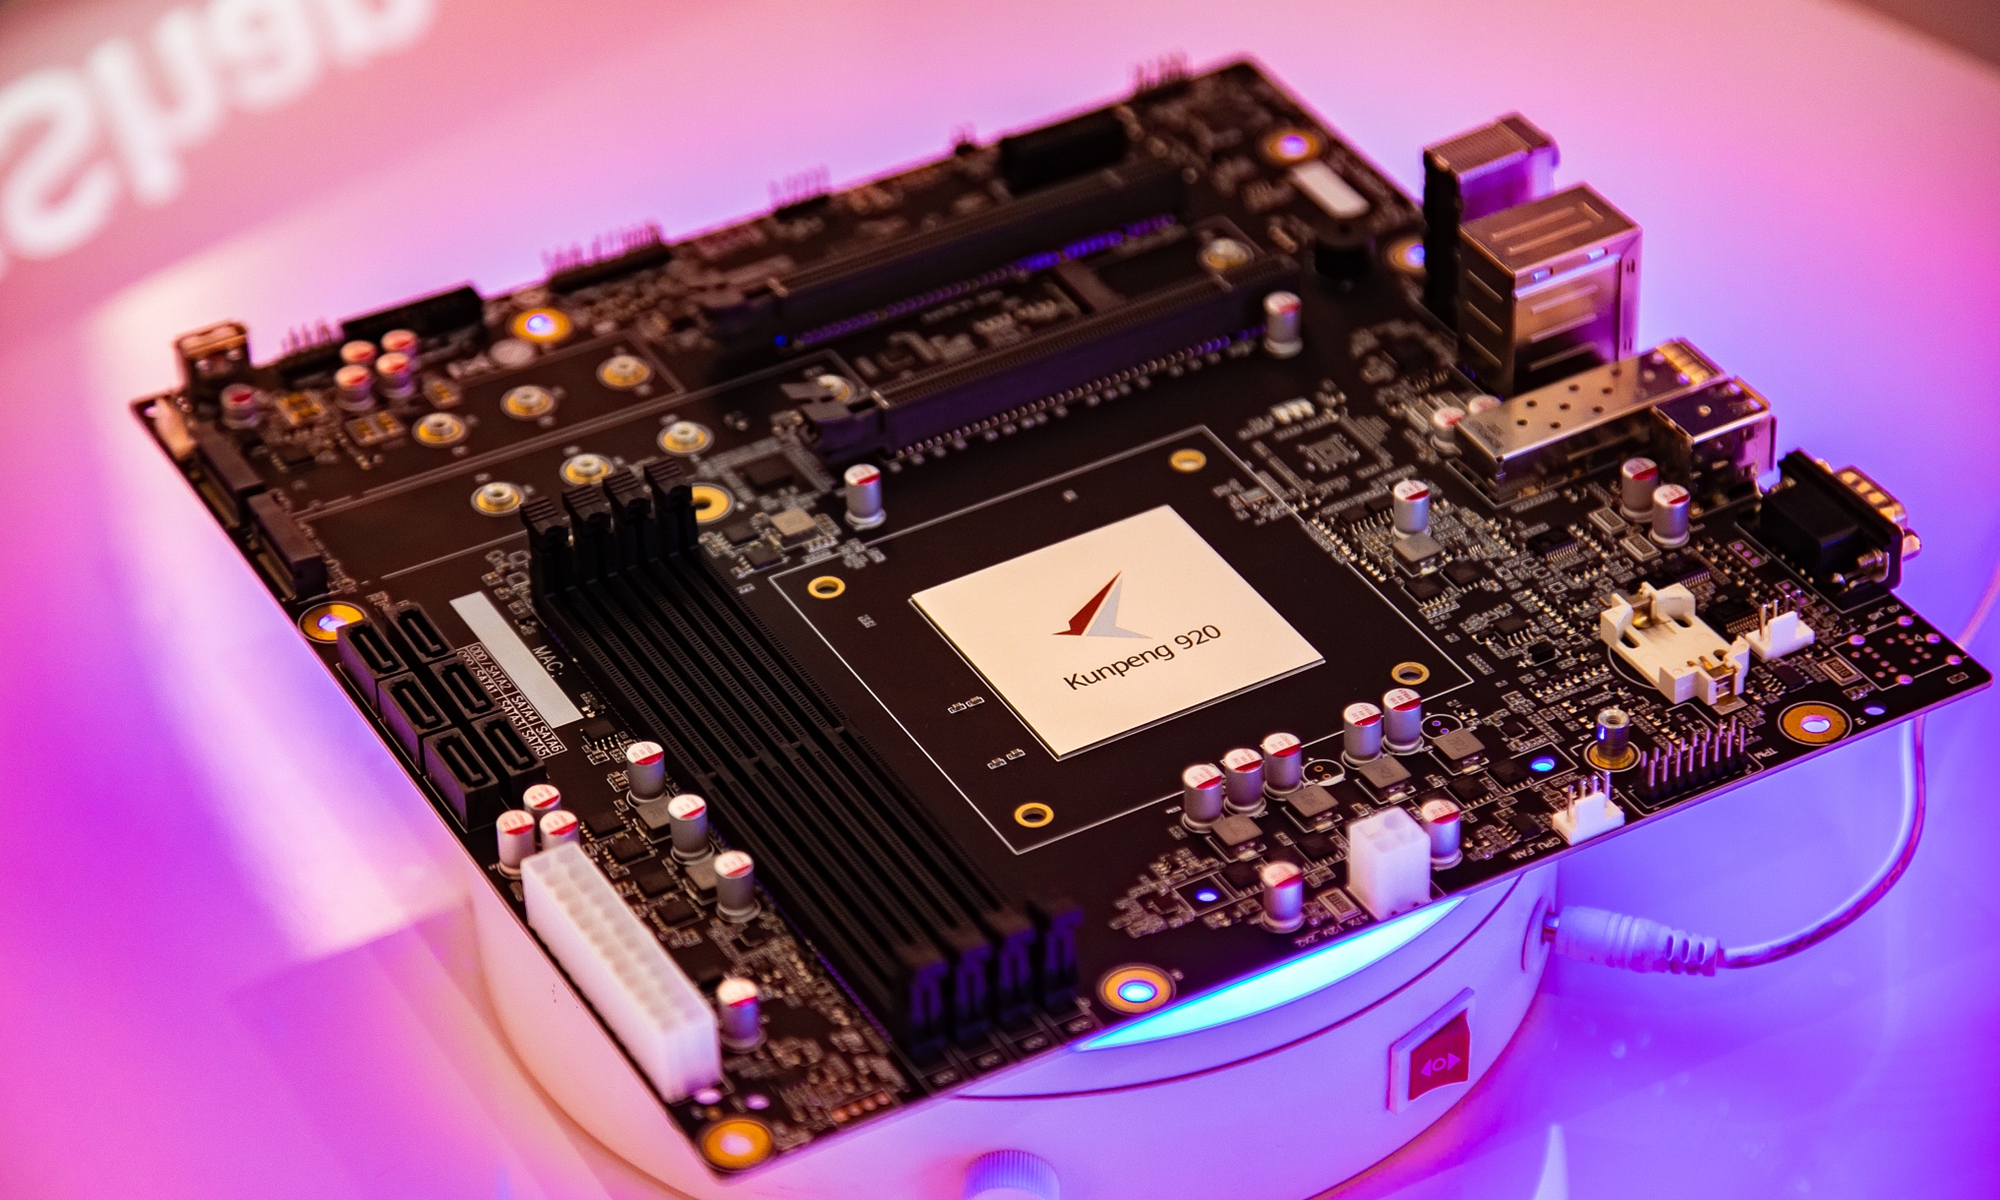 Kunpeng 920 chip is showcased at Huawei's Kunpeng Ecosystem Base in Chengdu, Southwest China's Sichuan Province on January 10, 2022. Photo: VCG